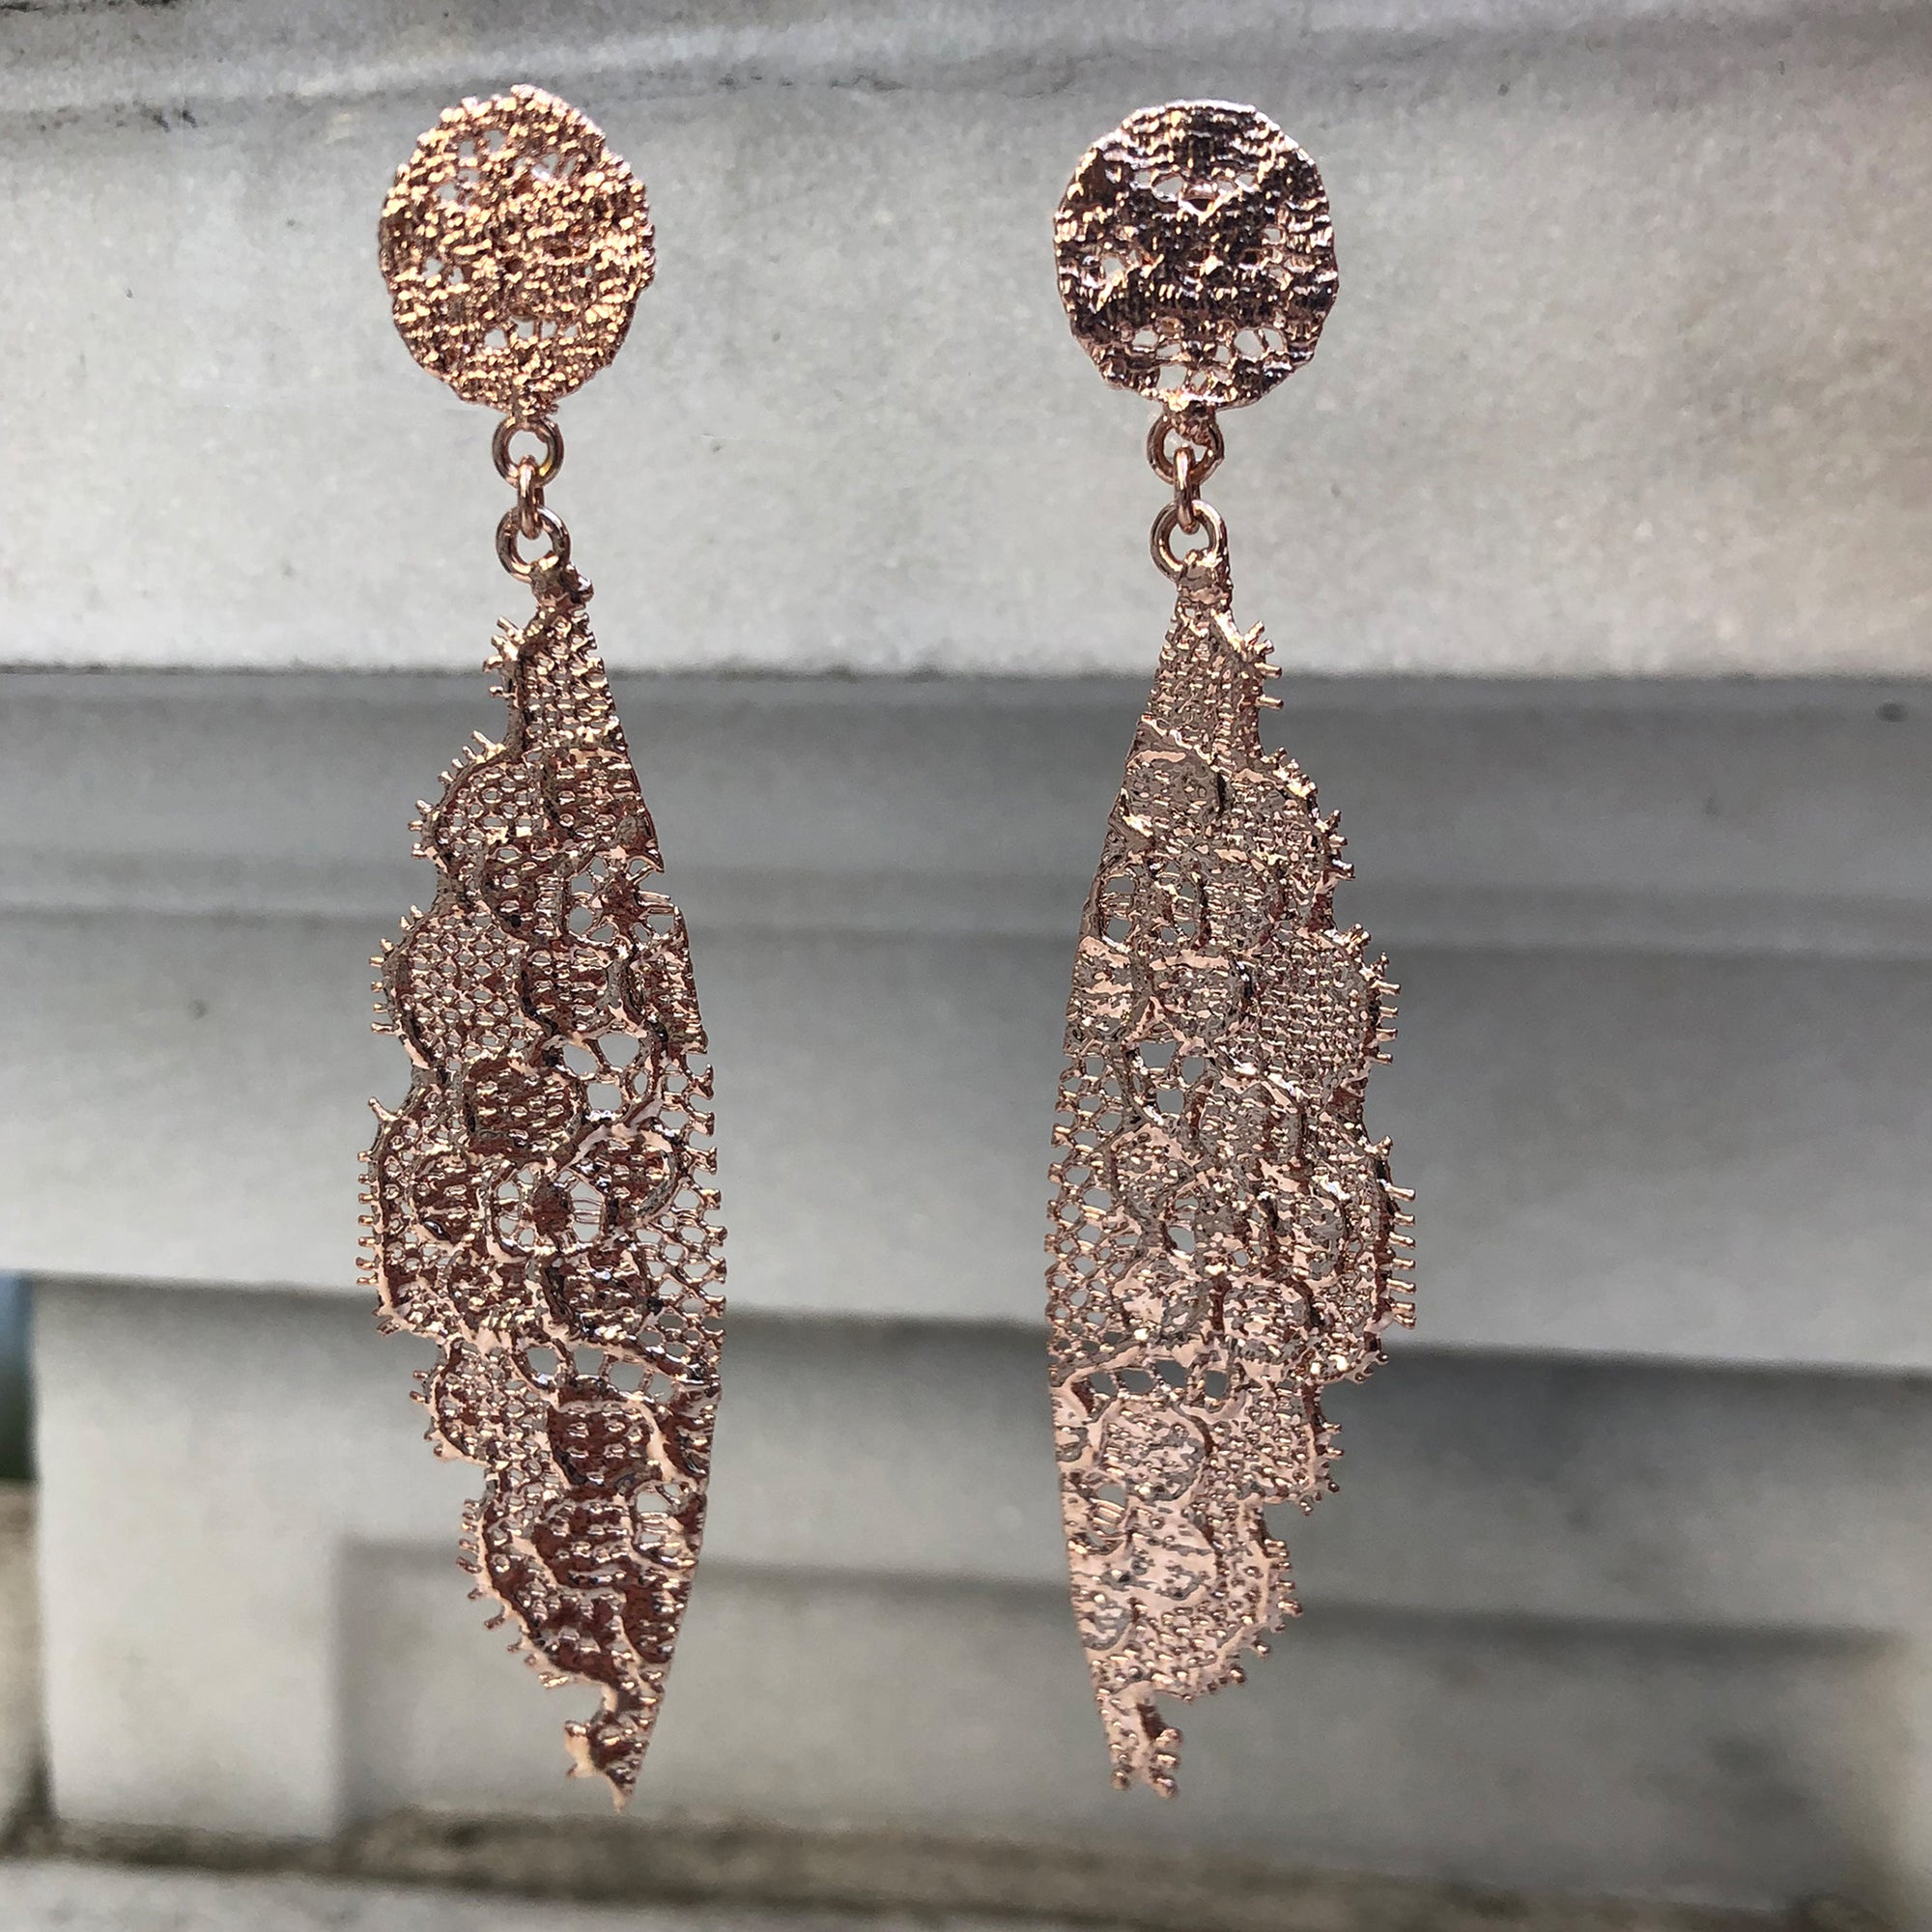 Stunning Eyelash Lace Earrings in Rose Gold. Unique 13th Anniversary Gift. Made with European Chantilly lace.